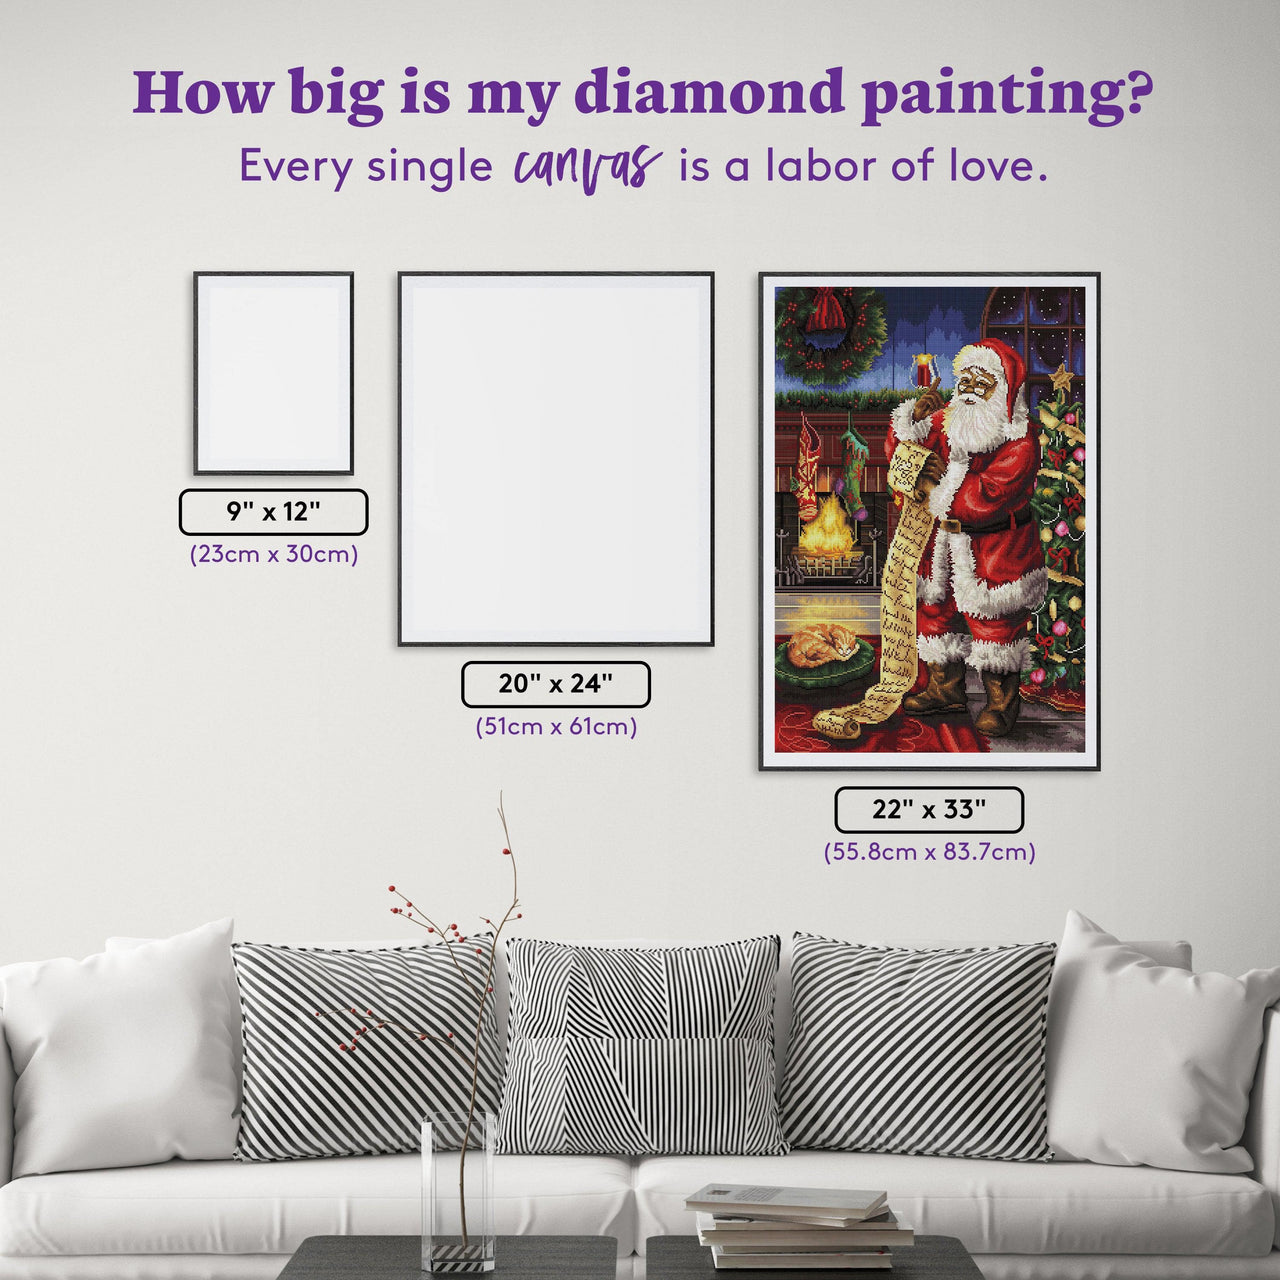 Diamond Painting Checking the List 22" x 33" (55.8cm x 83.7cm) / Square with 57 Colors including 4 ABs / 75,264